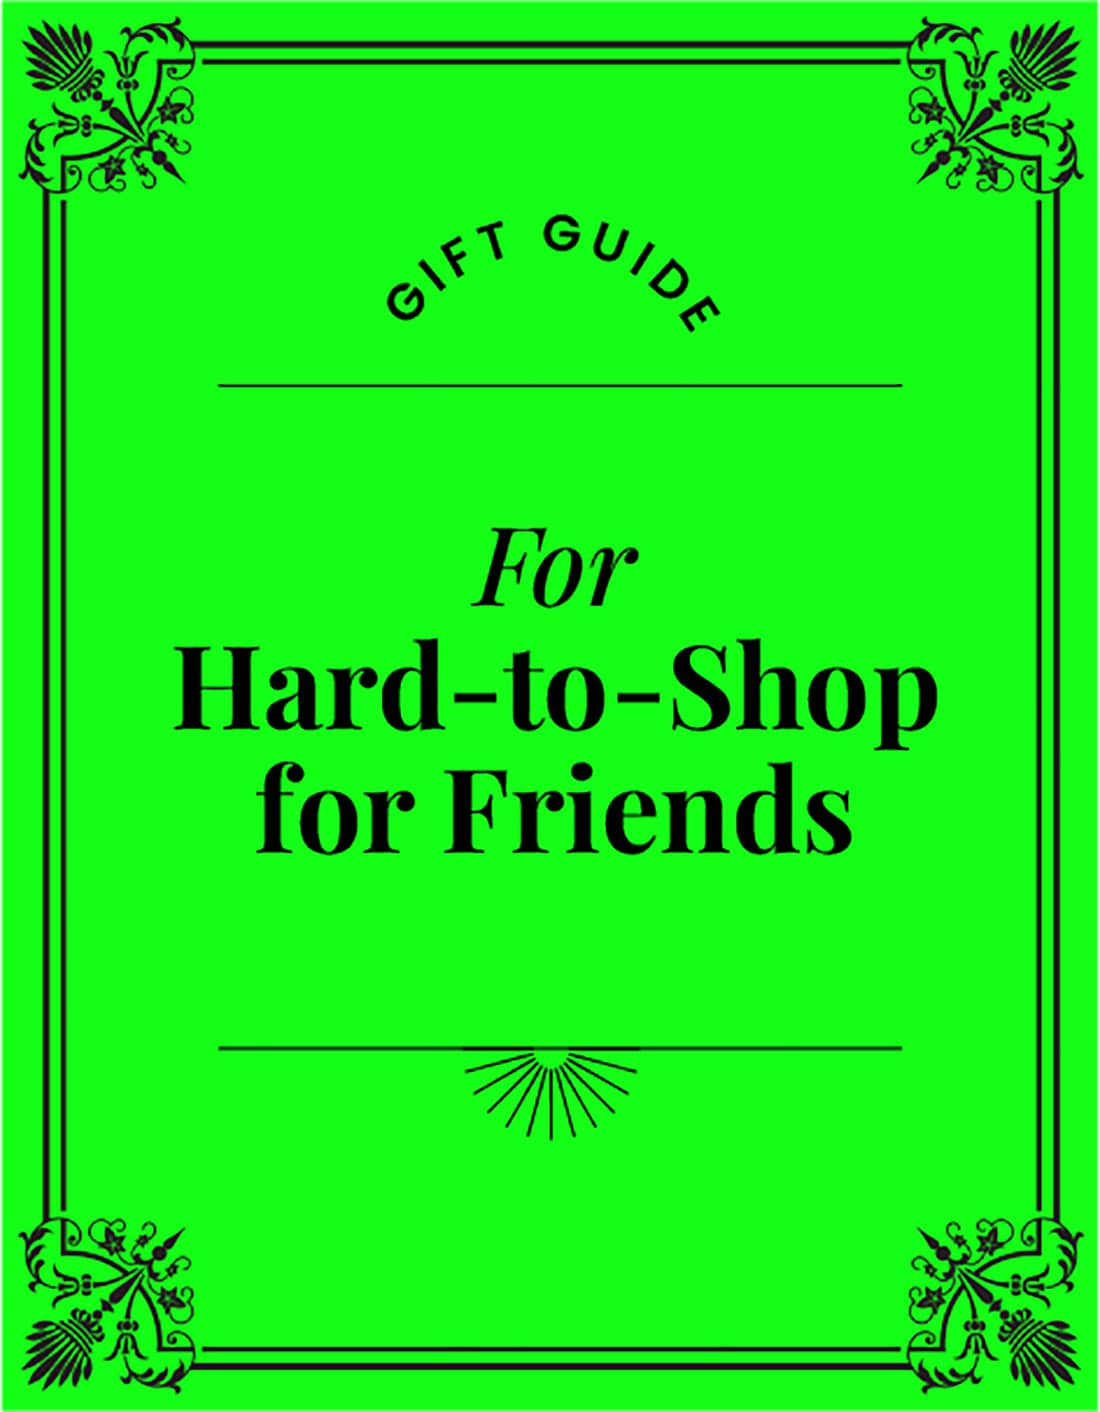 Gift Guide. For Hard-to-Shop for Friends